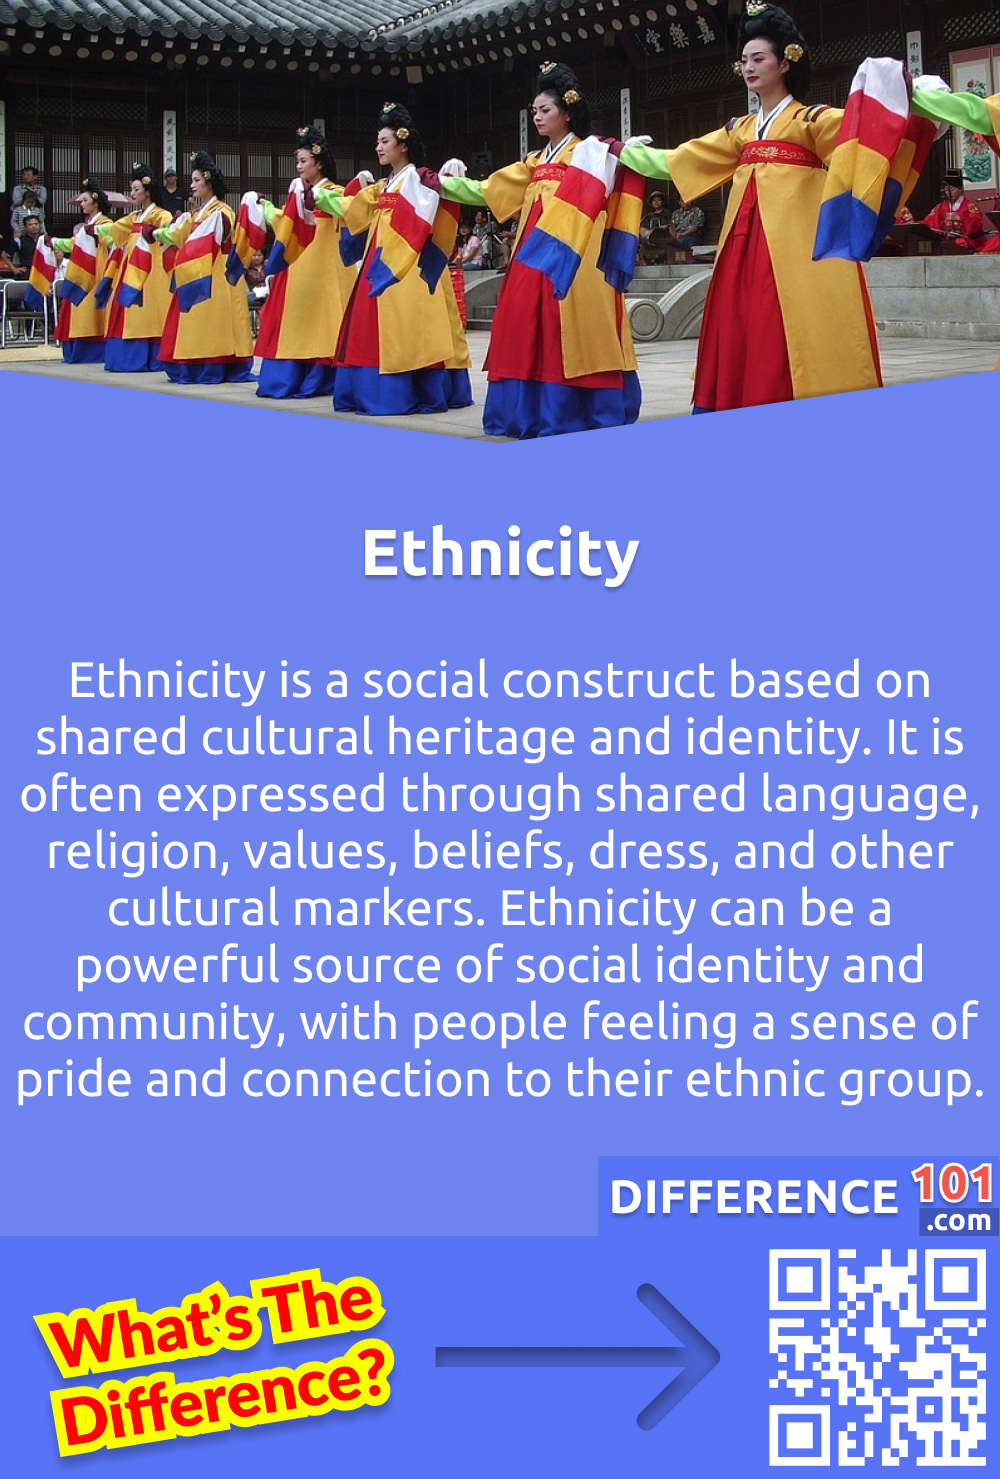 What Is Ethnicity? Ethnicity is a social construct based on shared cultural heritage and identity. It is often expressed through shared language, religion, values, beliefs, dress, and other cultural markers. Ethnicity can be a powerful source of social identity and community, with people feeling a sense of pride and connection to their ethnic group. However, it can also be a source of inequality and discrimination. For example, those from minority ethnic backgrounds may be subject to negative stereotypes, exclusion, and prejudice in society. Ultimately, ethnicity is a fluid concept that is continually changing and evolving.